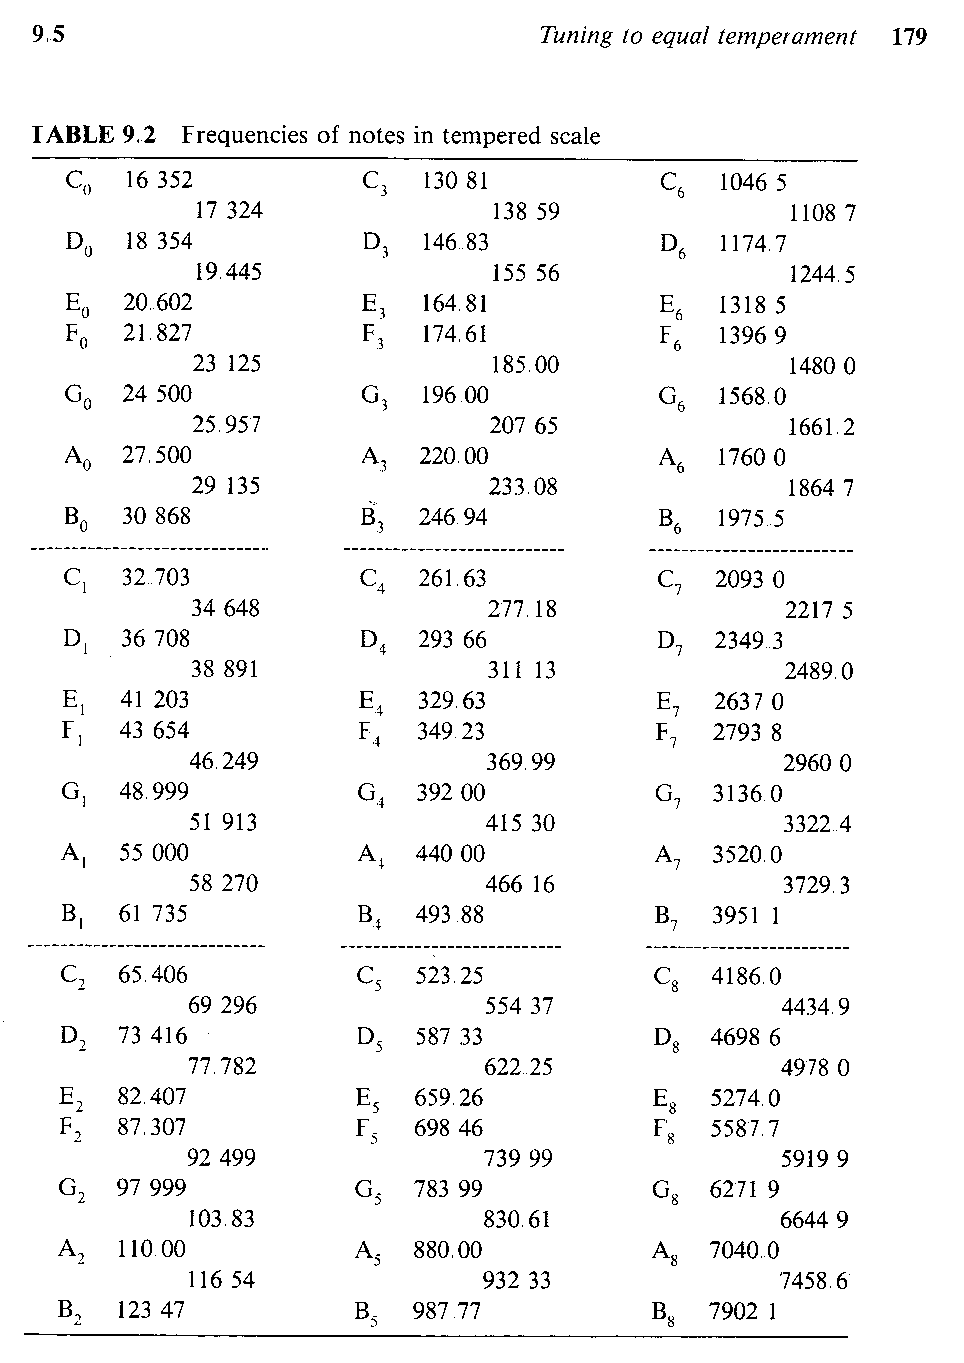 Guitar Note Frequency Chart